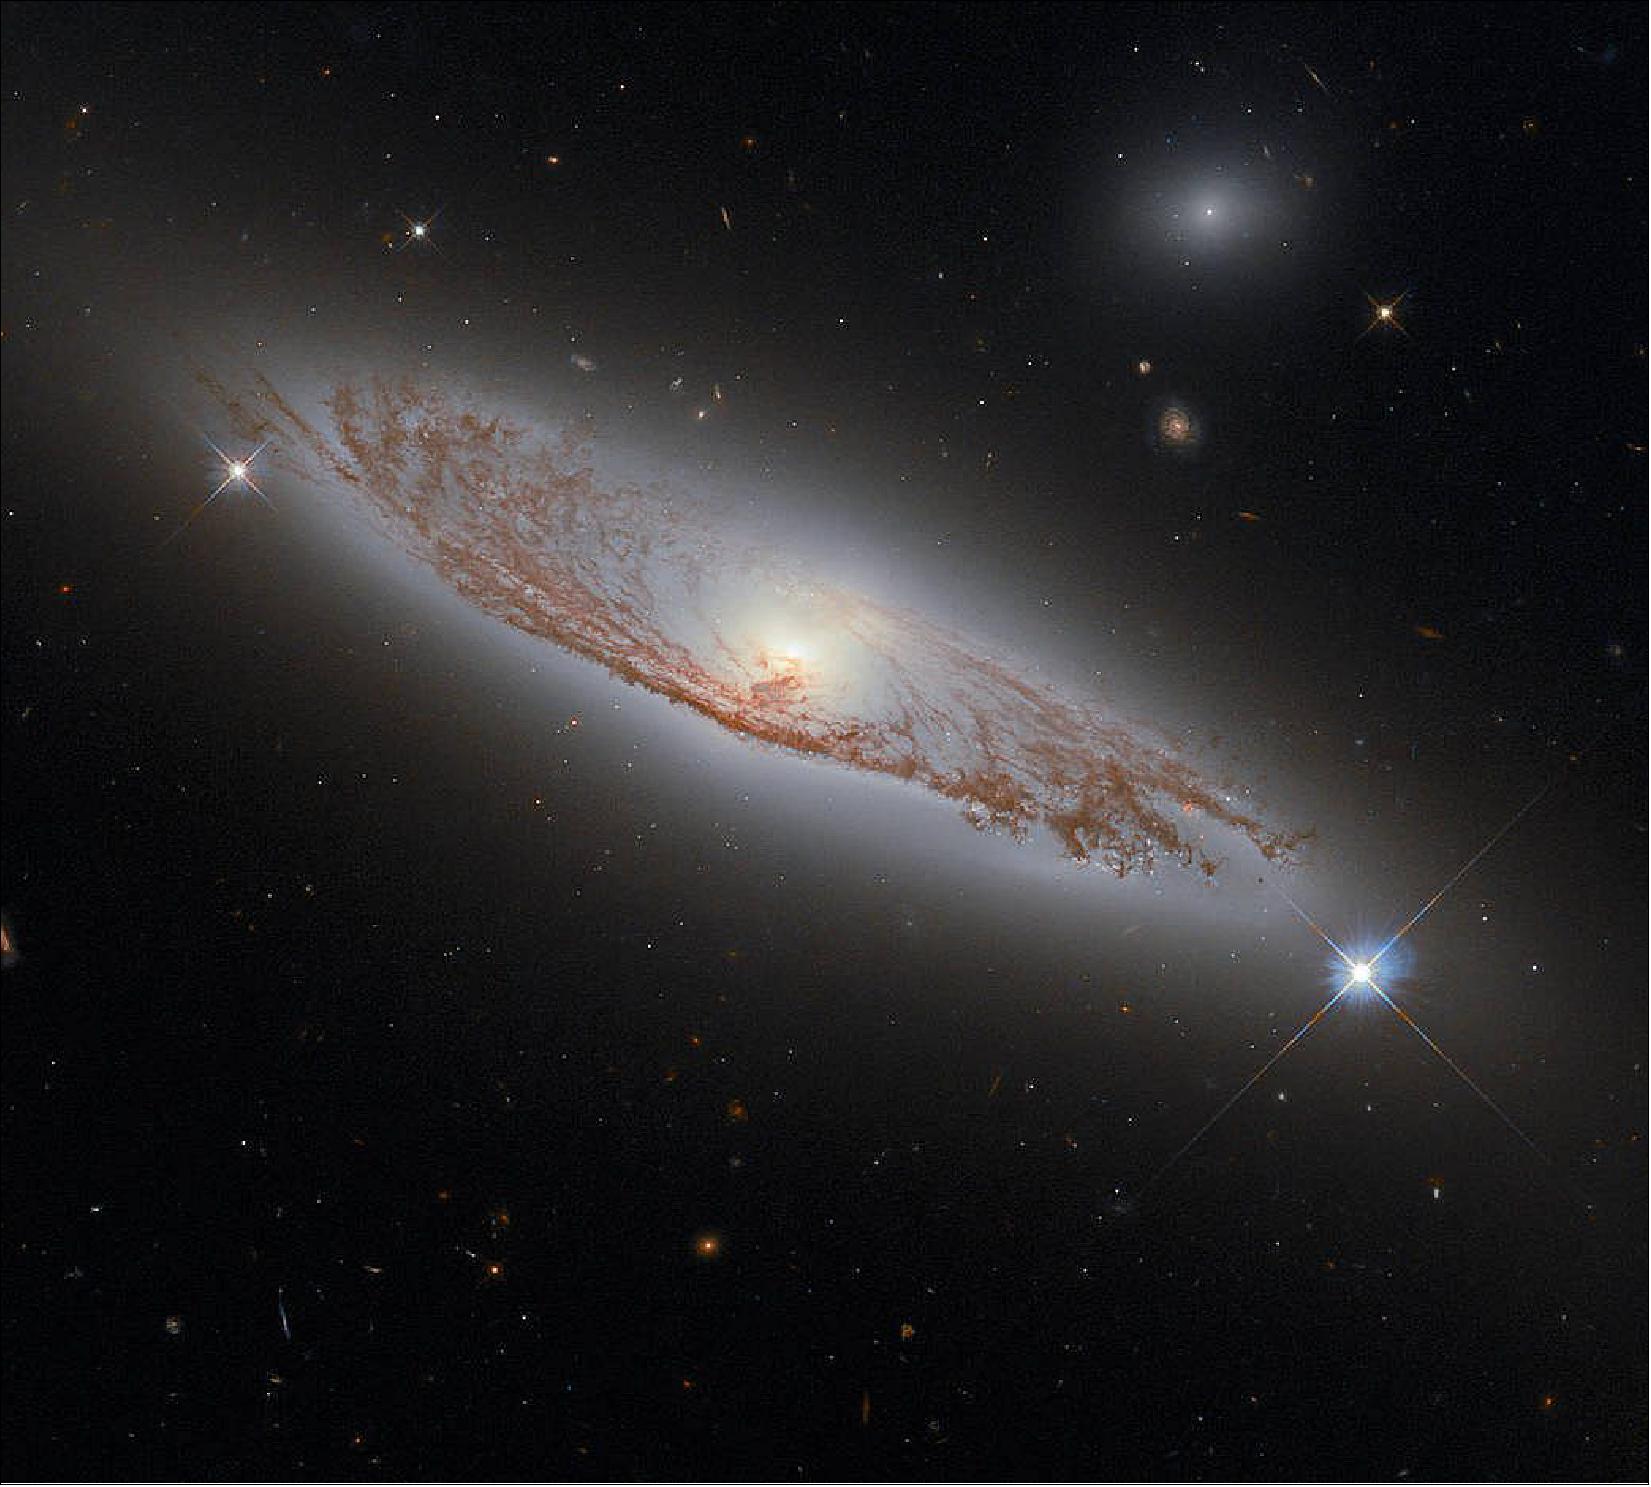 Figure 83: This image shows the spiral galaxy NGC 5037, in the constellation of Virgo. First documented by William Herschel in 1785, the galaxy lies about 150 million light-years away from Earth. Despite this distance, we can see the delicate structures of gas and dust within the galaxy in extraordinary detail. This detail is possible using Hubble’s WFC3, whose combined exposures created this image (image credit: ESA/Hubble & NASA, D. Rosario; Acknowledgment: L. Shatz)